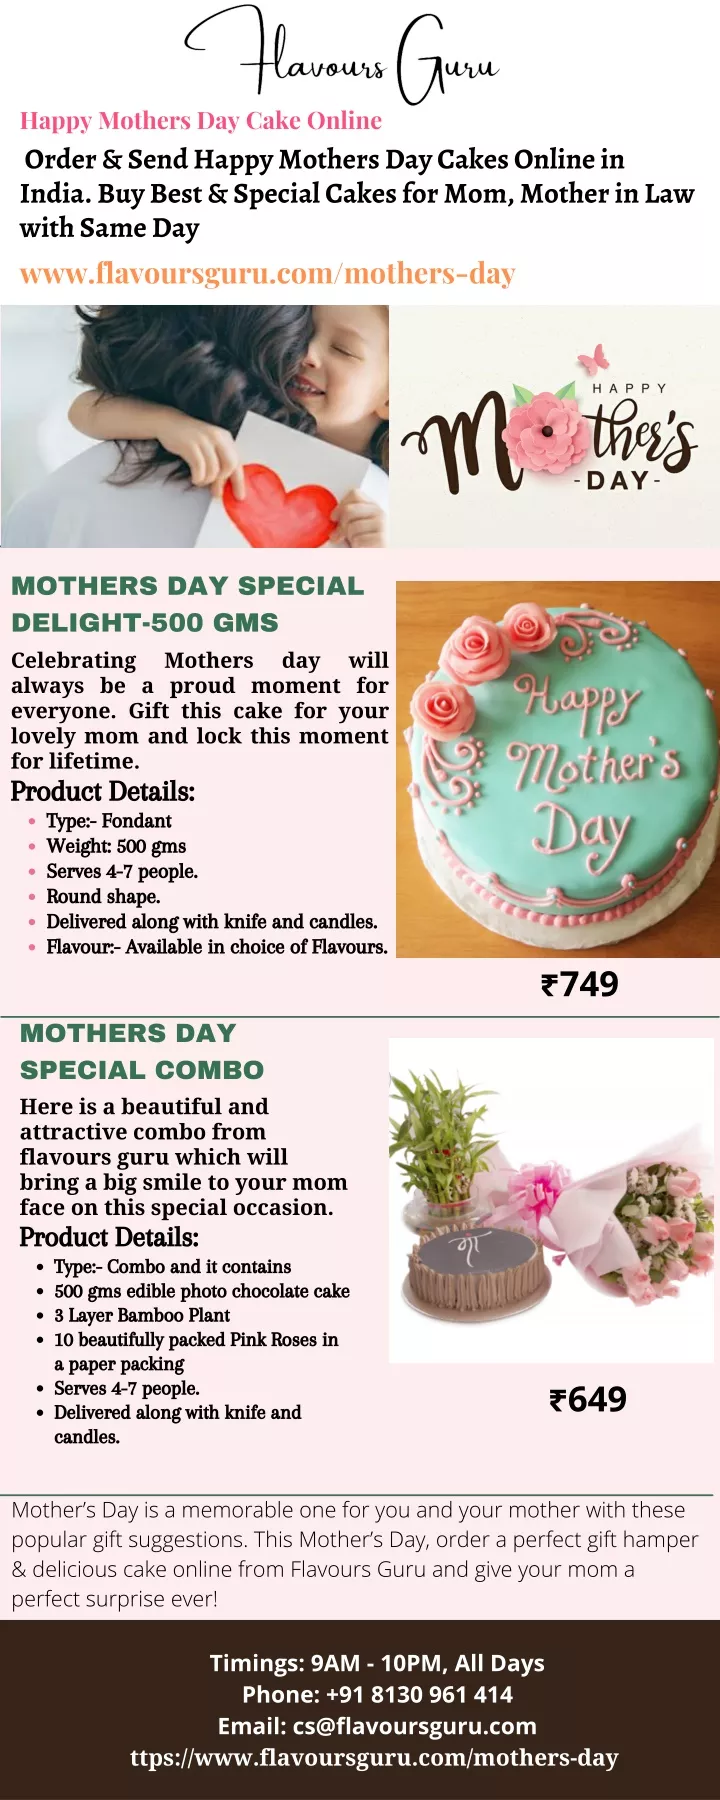 happy mothers day cake online